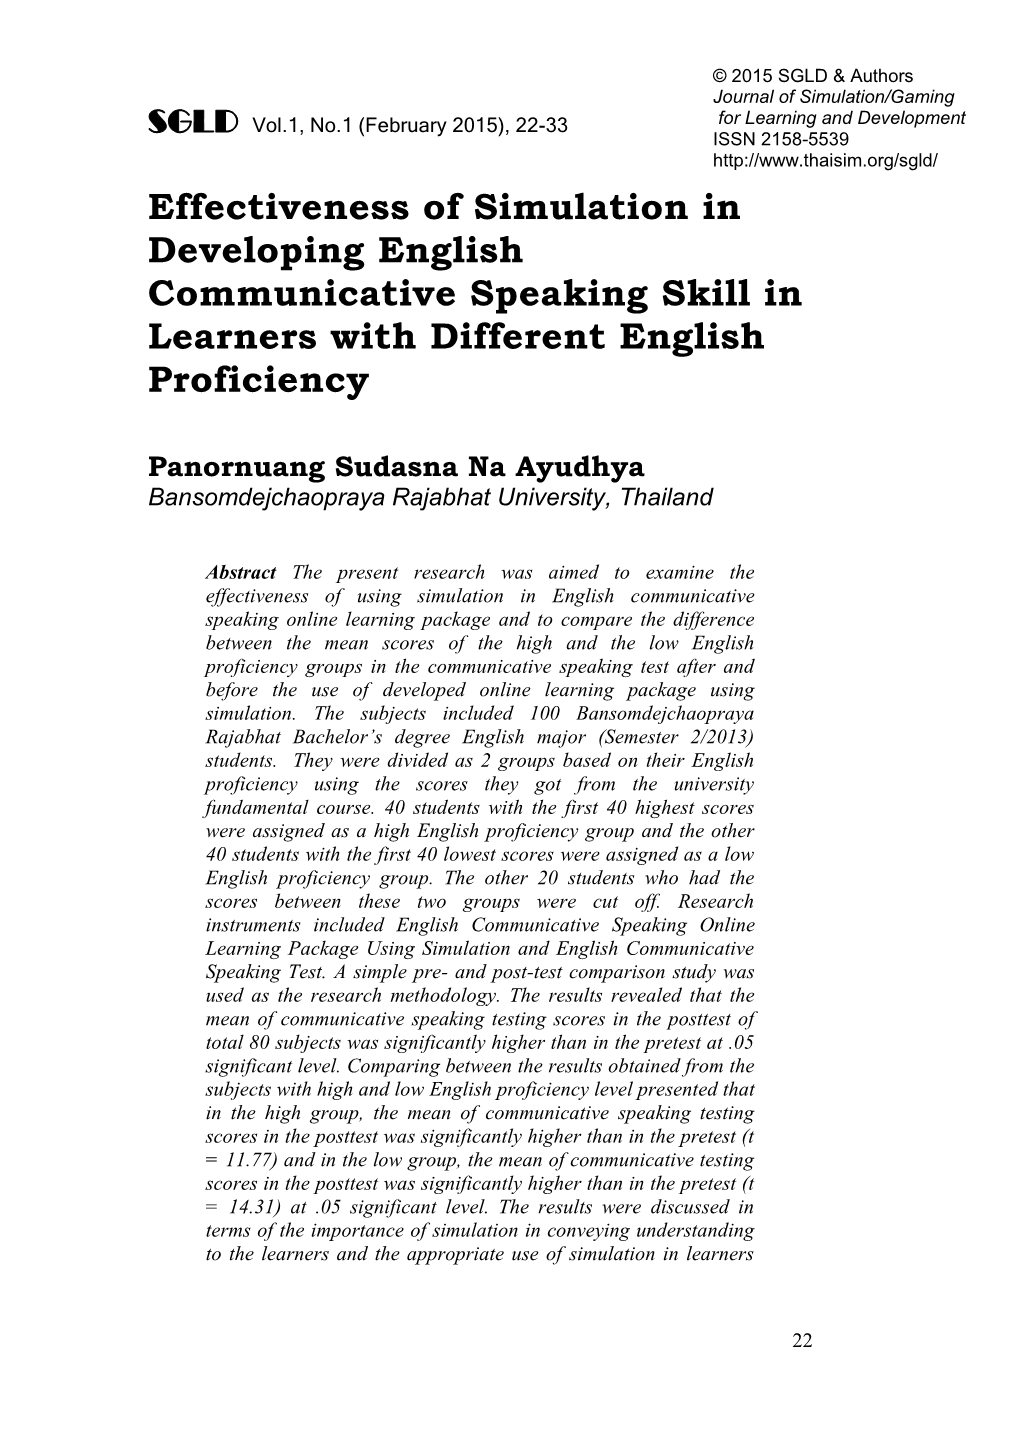 Effectiveness of Simulation in Developing English Communicative Speaking Skill in Learners with Different English Proficiency